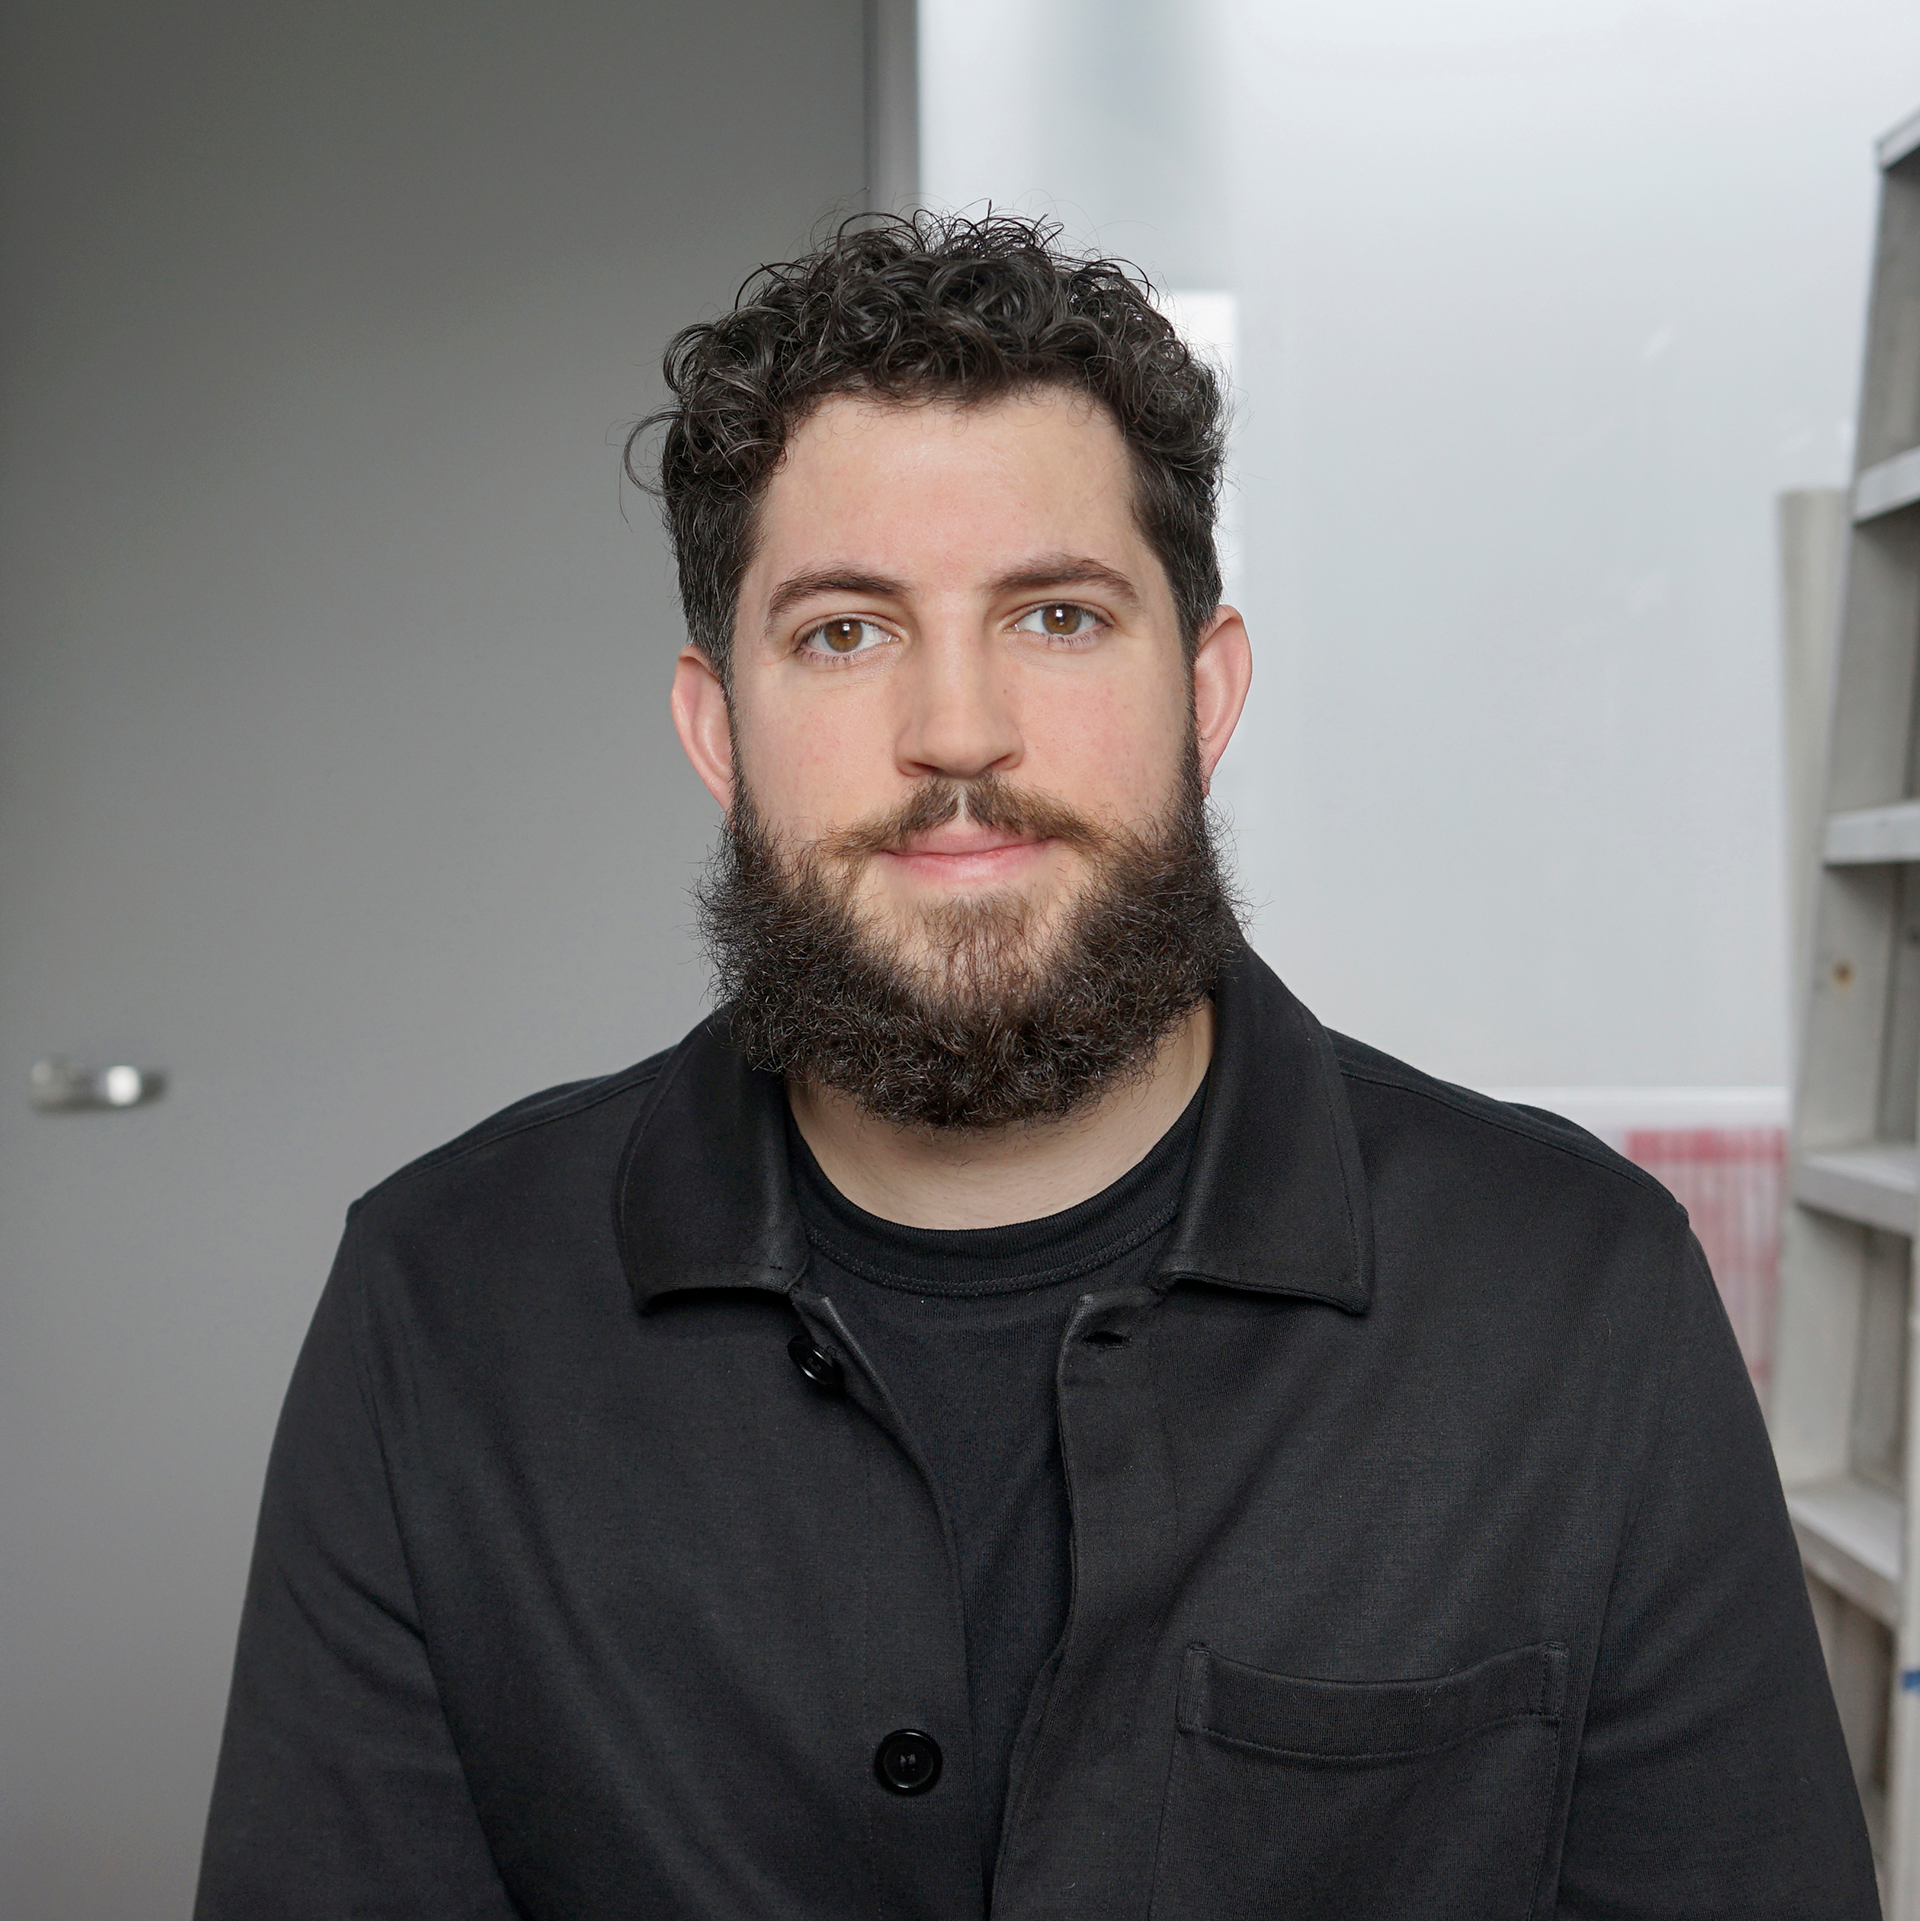 A man with dark curly hair and a dark beard looking at the camera in front of a grey wall